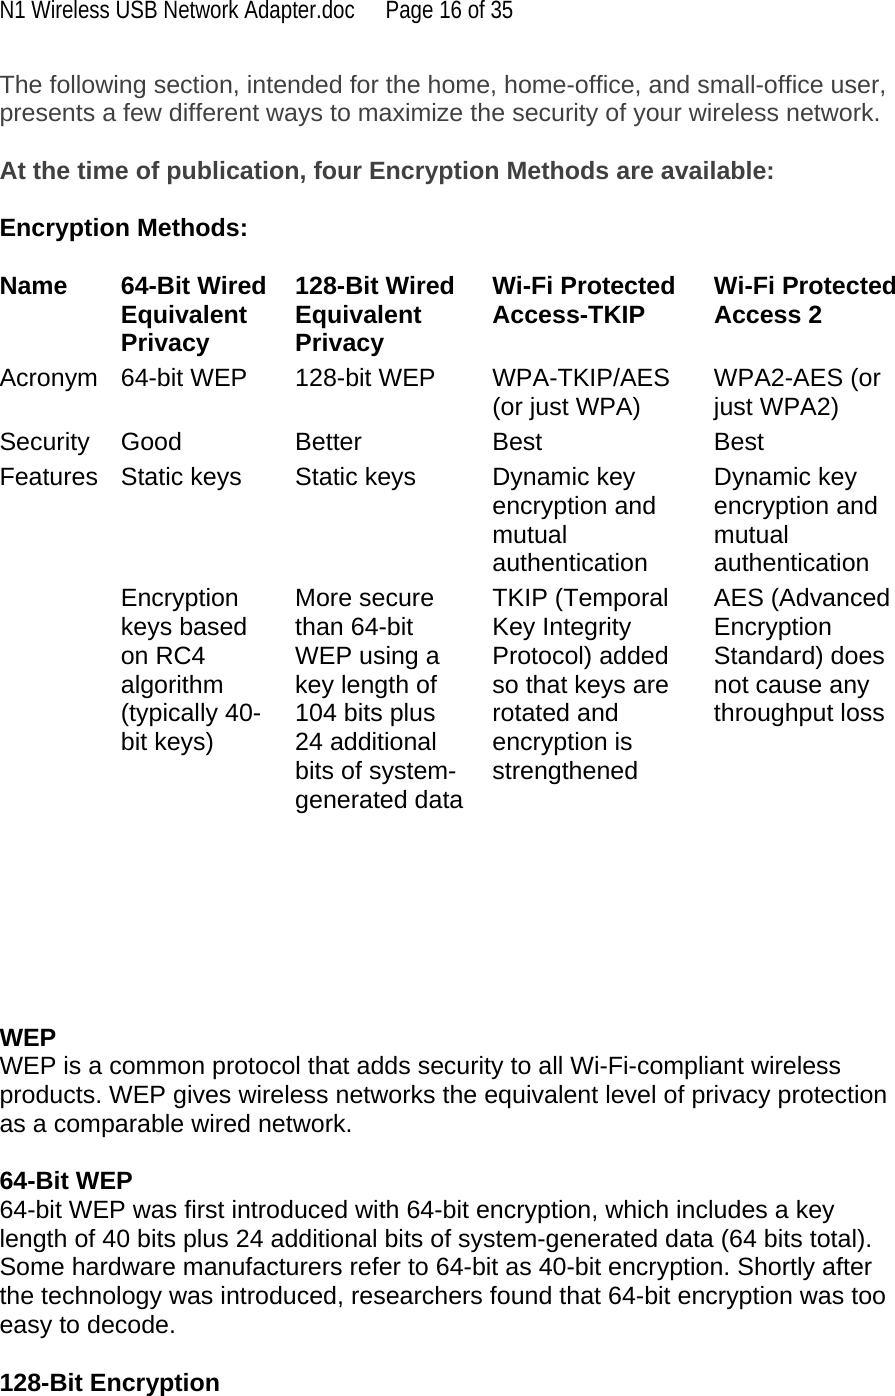 N1 Wireless USB Network Adapter.doc  Page 16 of 35 The following section, intended for the home, home-office, and small-office user, presents a few different ways to maximize the security of your wireless network.  At the time of publication, four Encryption Methods are available:  Encryption Methods:  Name 64-Bit Wired Equivalent Privacy128-Bit Wired Equivalent PrivacyWi-Fi Protected Access-TKIP Wi-Fi Protected Access 2 Acronym 64-bit WEP 128-bit WEP WPA-TKIP/AES (or just WPA) WPA2-AES (or just WPA2)Security Good Better Best BestFeatures Static keys  Static keys  Dynamic key encryption and mutual authenticationDynamic key encryption and mutual authentication Encryption keys based on RC4 algorithm (typically 40-bit keys)More secure than 64-bit WEP using a key length of 104 bits plus 24 additional bits of system-generated dataTKIP (Temporal Key Integrity Protocol) added so that keys are rotated and encryption is strengthenedAES (Advanced Encryption Standard) does not cause any throughput loss      WEP  WEP is a common protocol that adds security to all Wi-Fi-compliant wireless products. WEP gives wireless networks the equivalent level of privacy protection as a comparable wired network.  64-Bit WEP 64-bit WEP was first introduced with 64-bit encryption, which includes a key length of 40 bits plus 24 additional bits of system-generated data (64 bits total). Some hardware manufacturers refer to 64-bit as 40-bit encryption. Shortly after the technology was introduced, researchers found that 64-bit encryption was too easy to decode.  128-Bit Encryption 